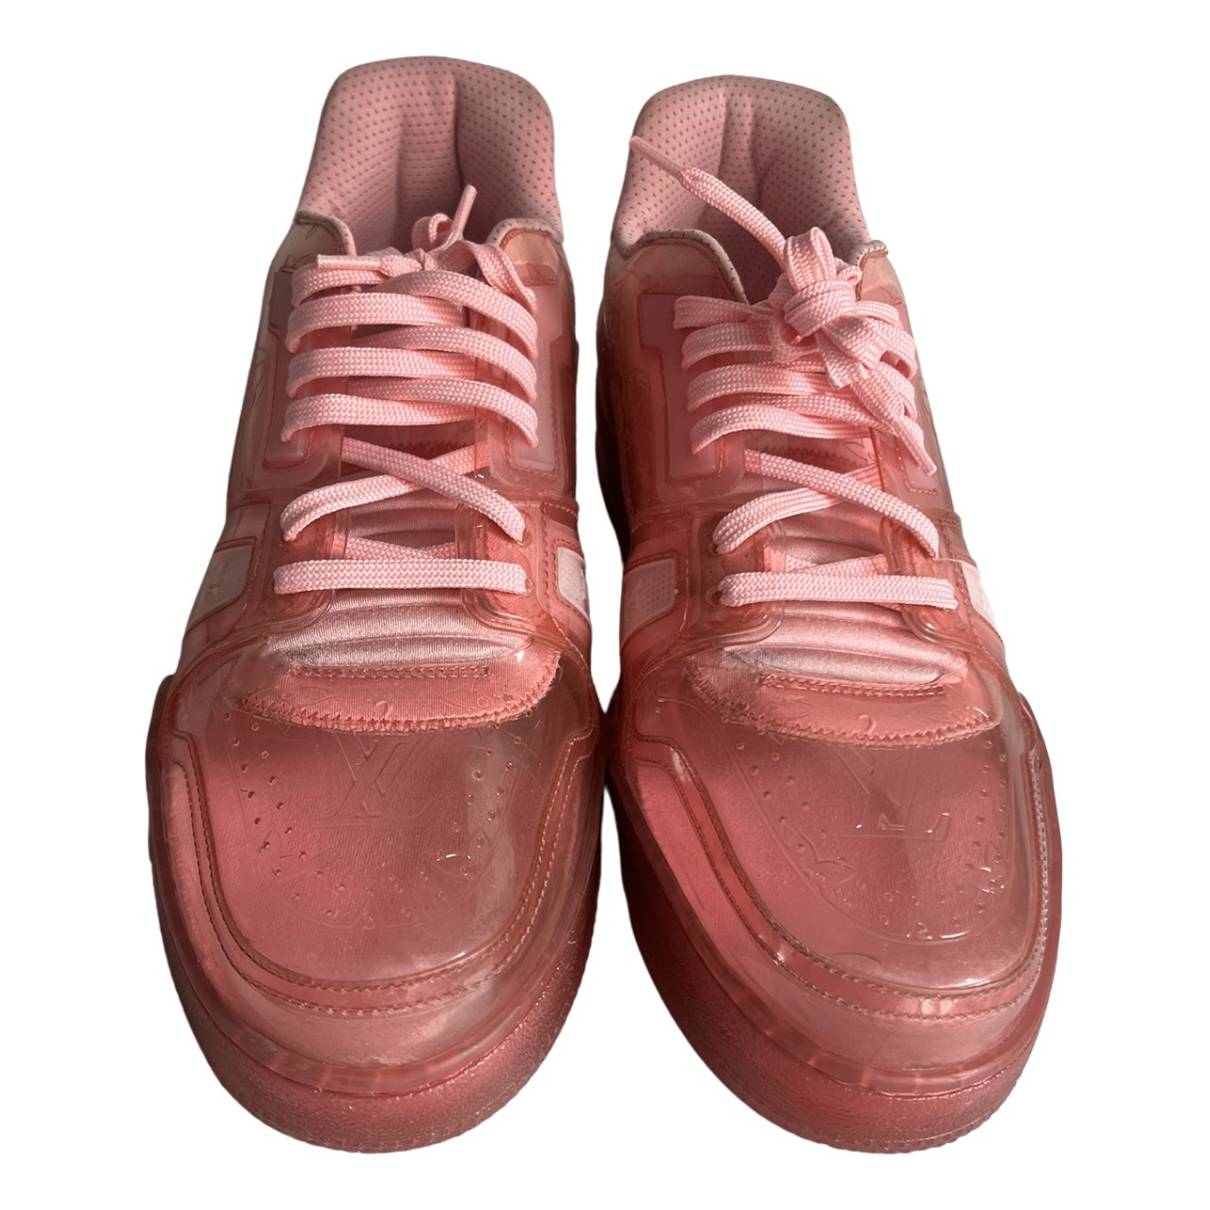 Lv trainer low trainers Louis Vuitton Pink size 9 UK in Plastic - 36699732